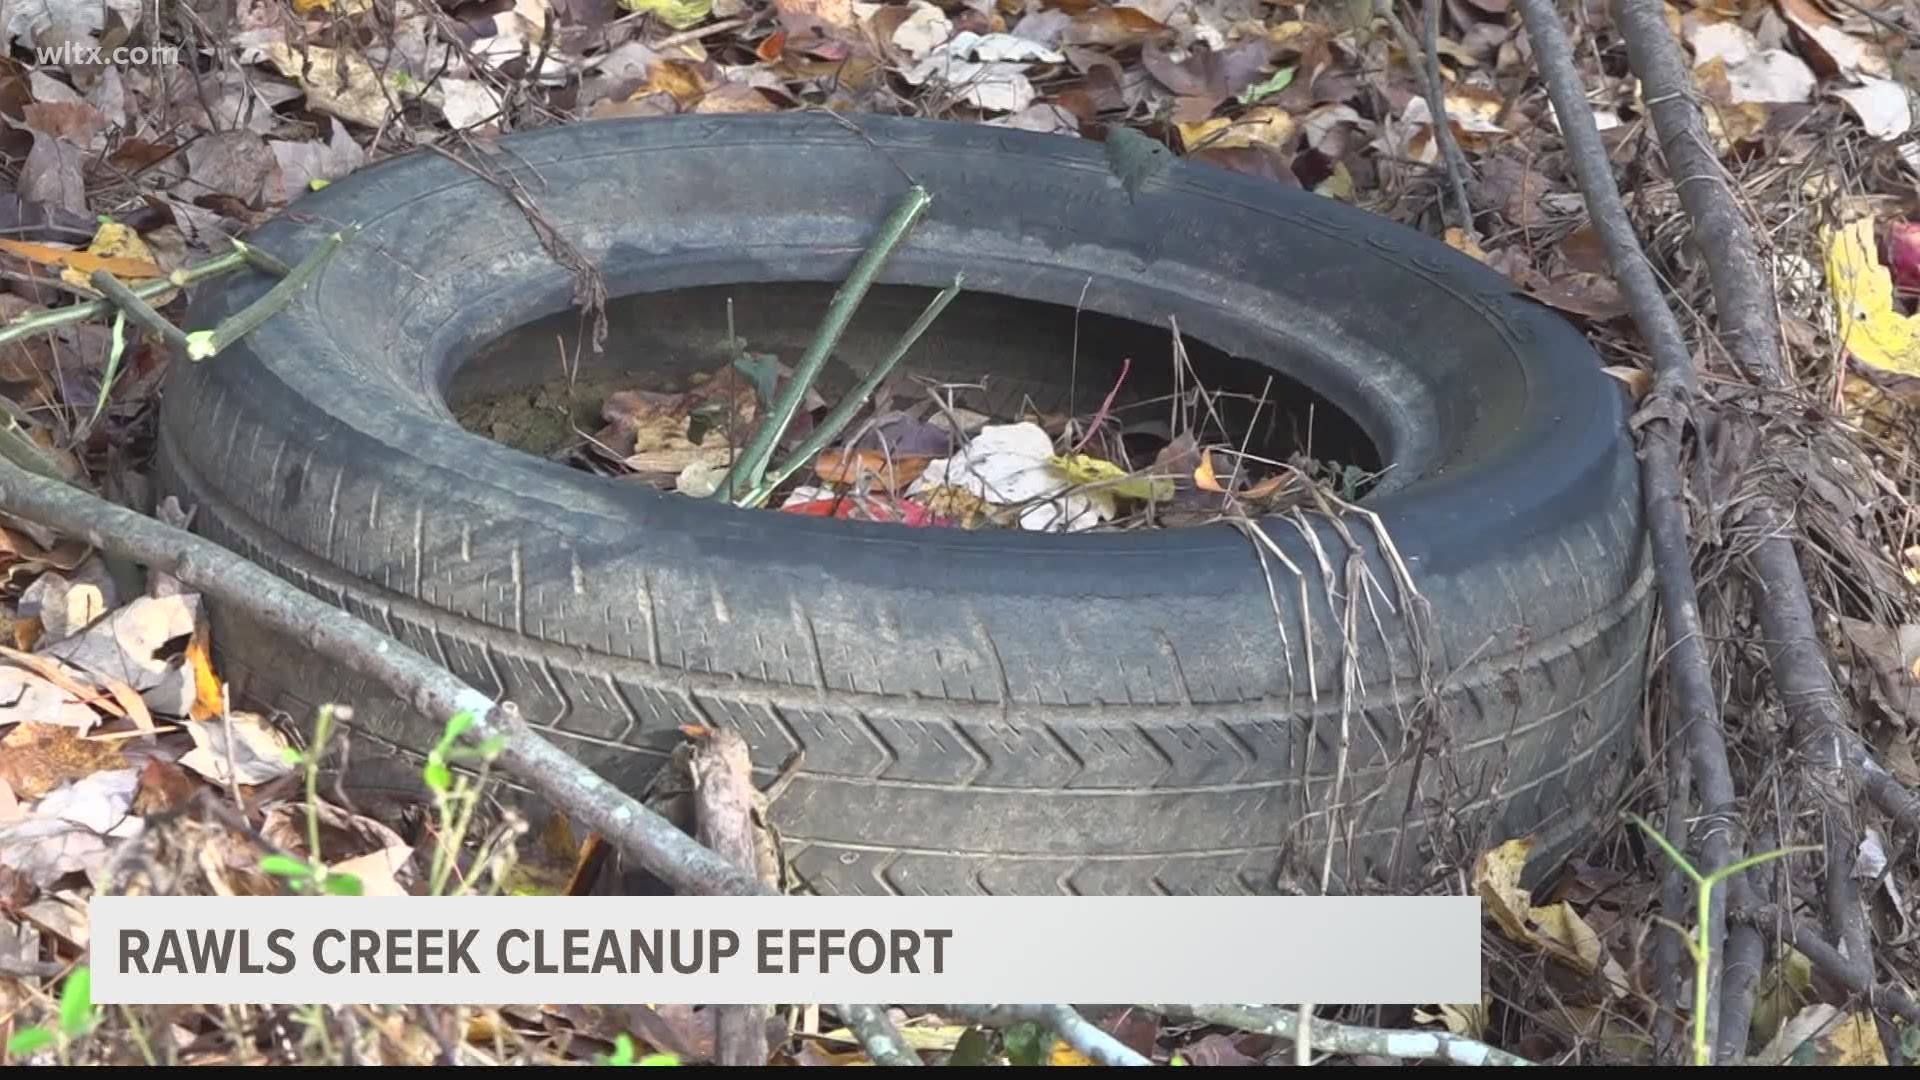 The SC Floodwater Commission along with Blue Granite, South Carolina 7 and others are organizing a clean up event next Saturday.